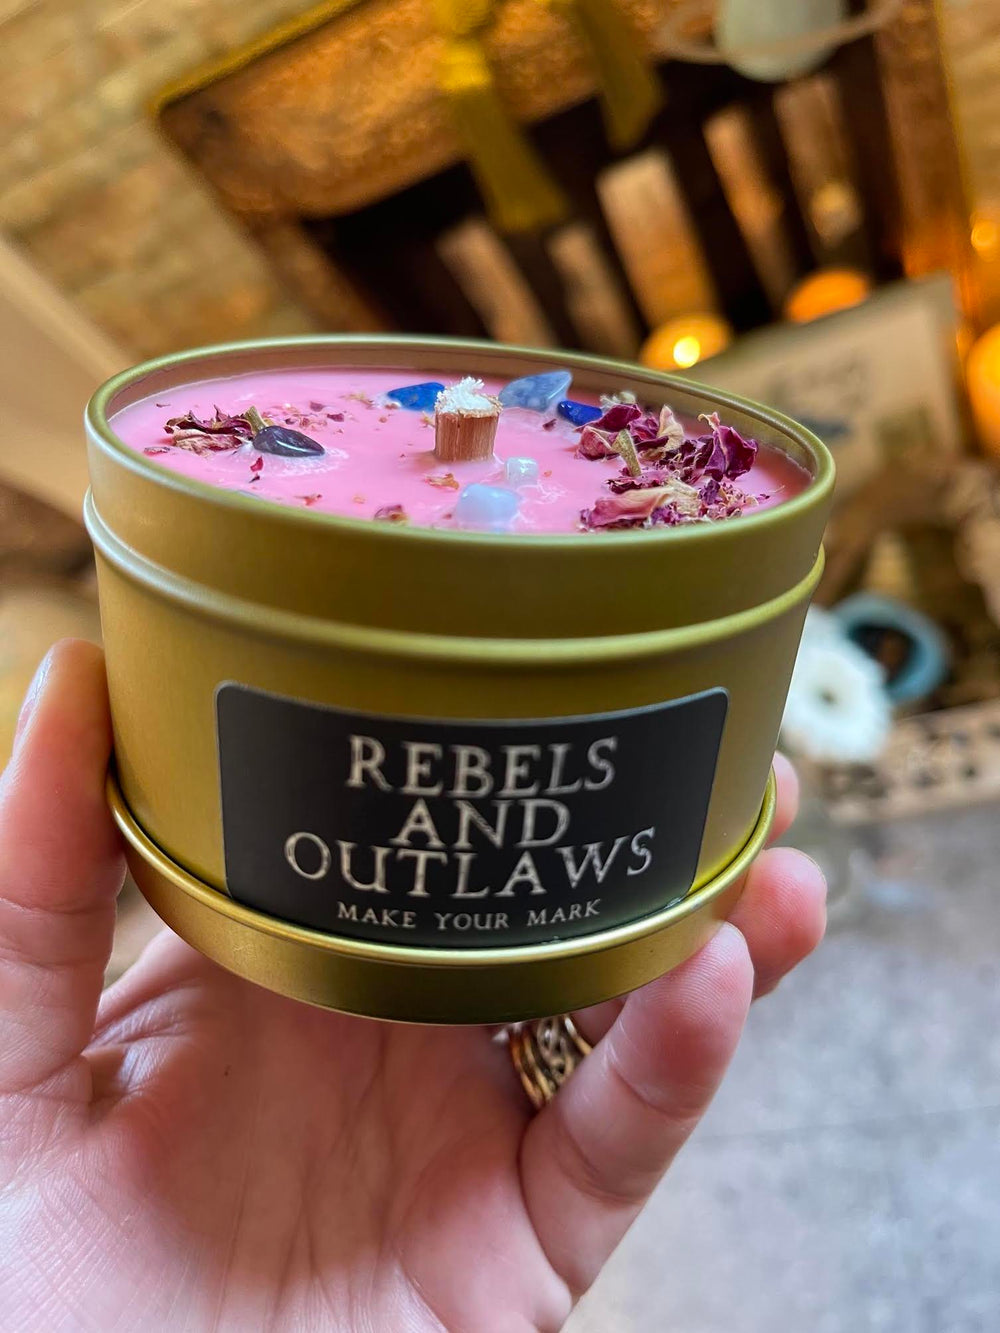 this is the front of the Rebels and Outlaws candle